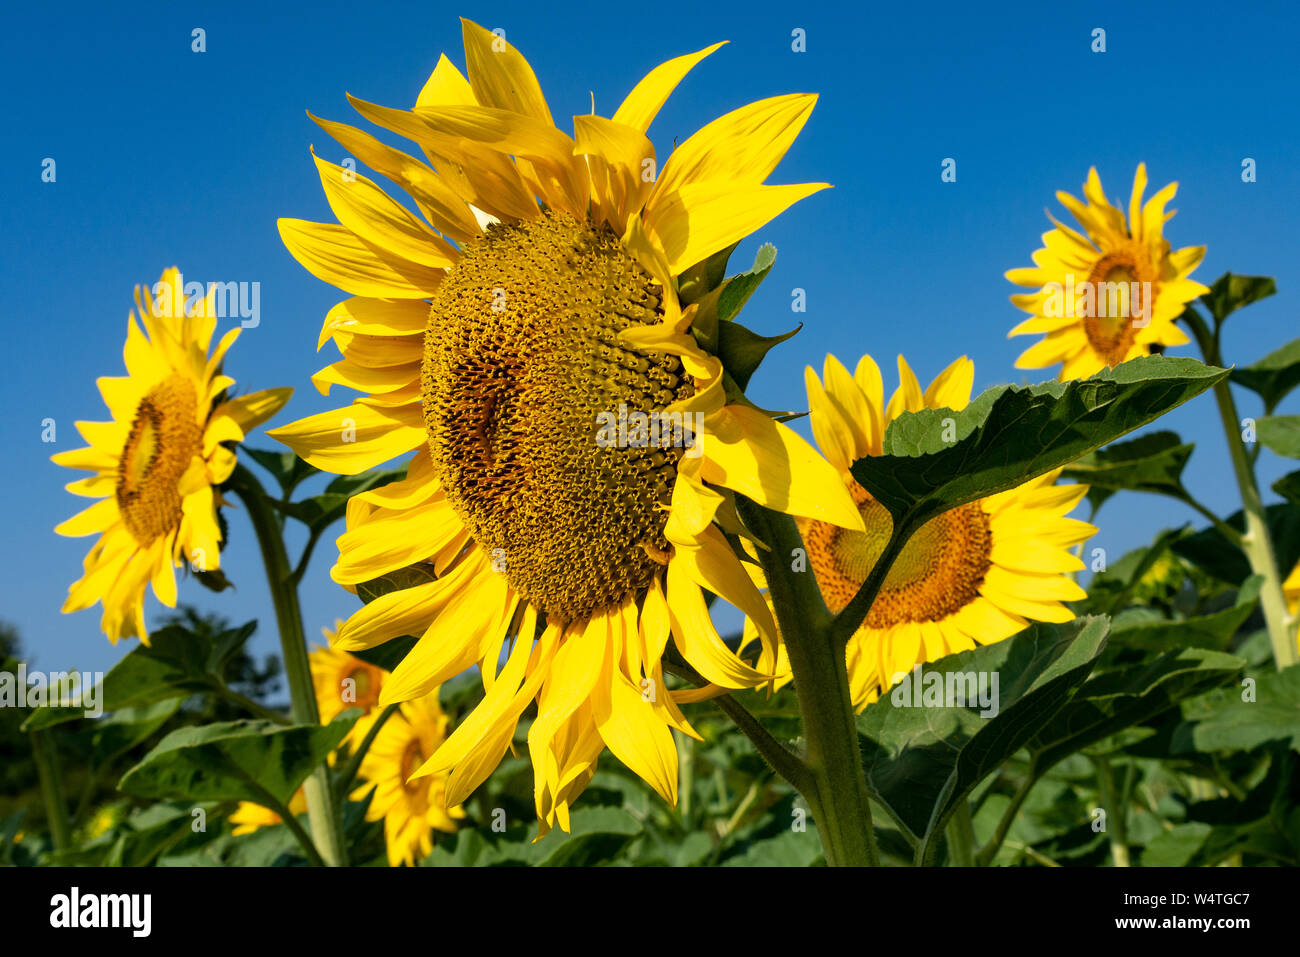 Flowering sunflower against a blue sky background. Closeup. Stock Photo